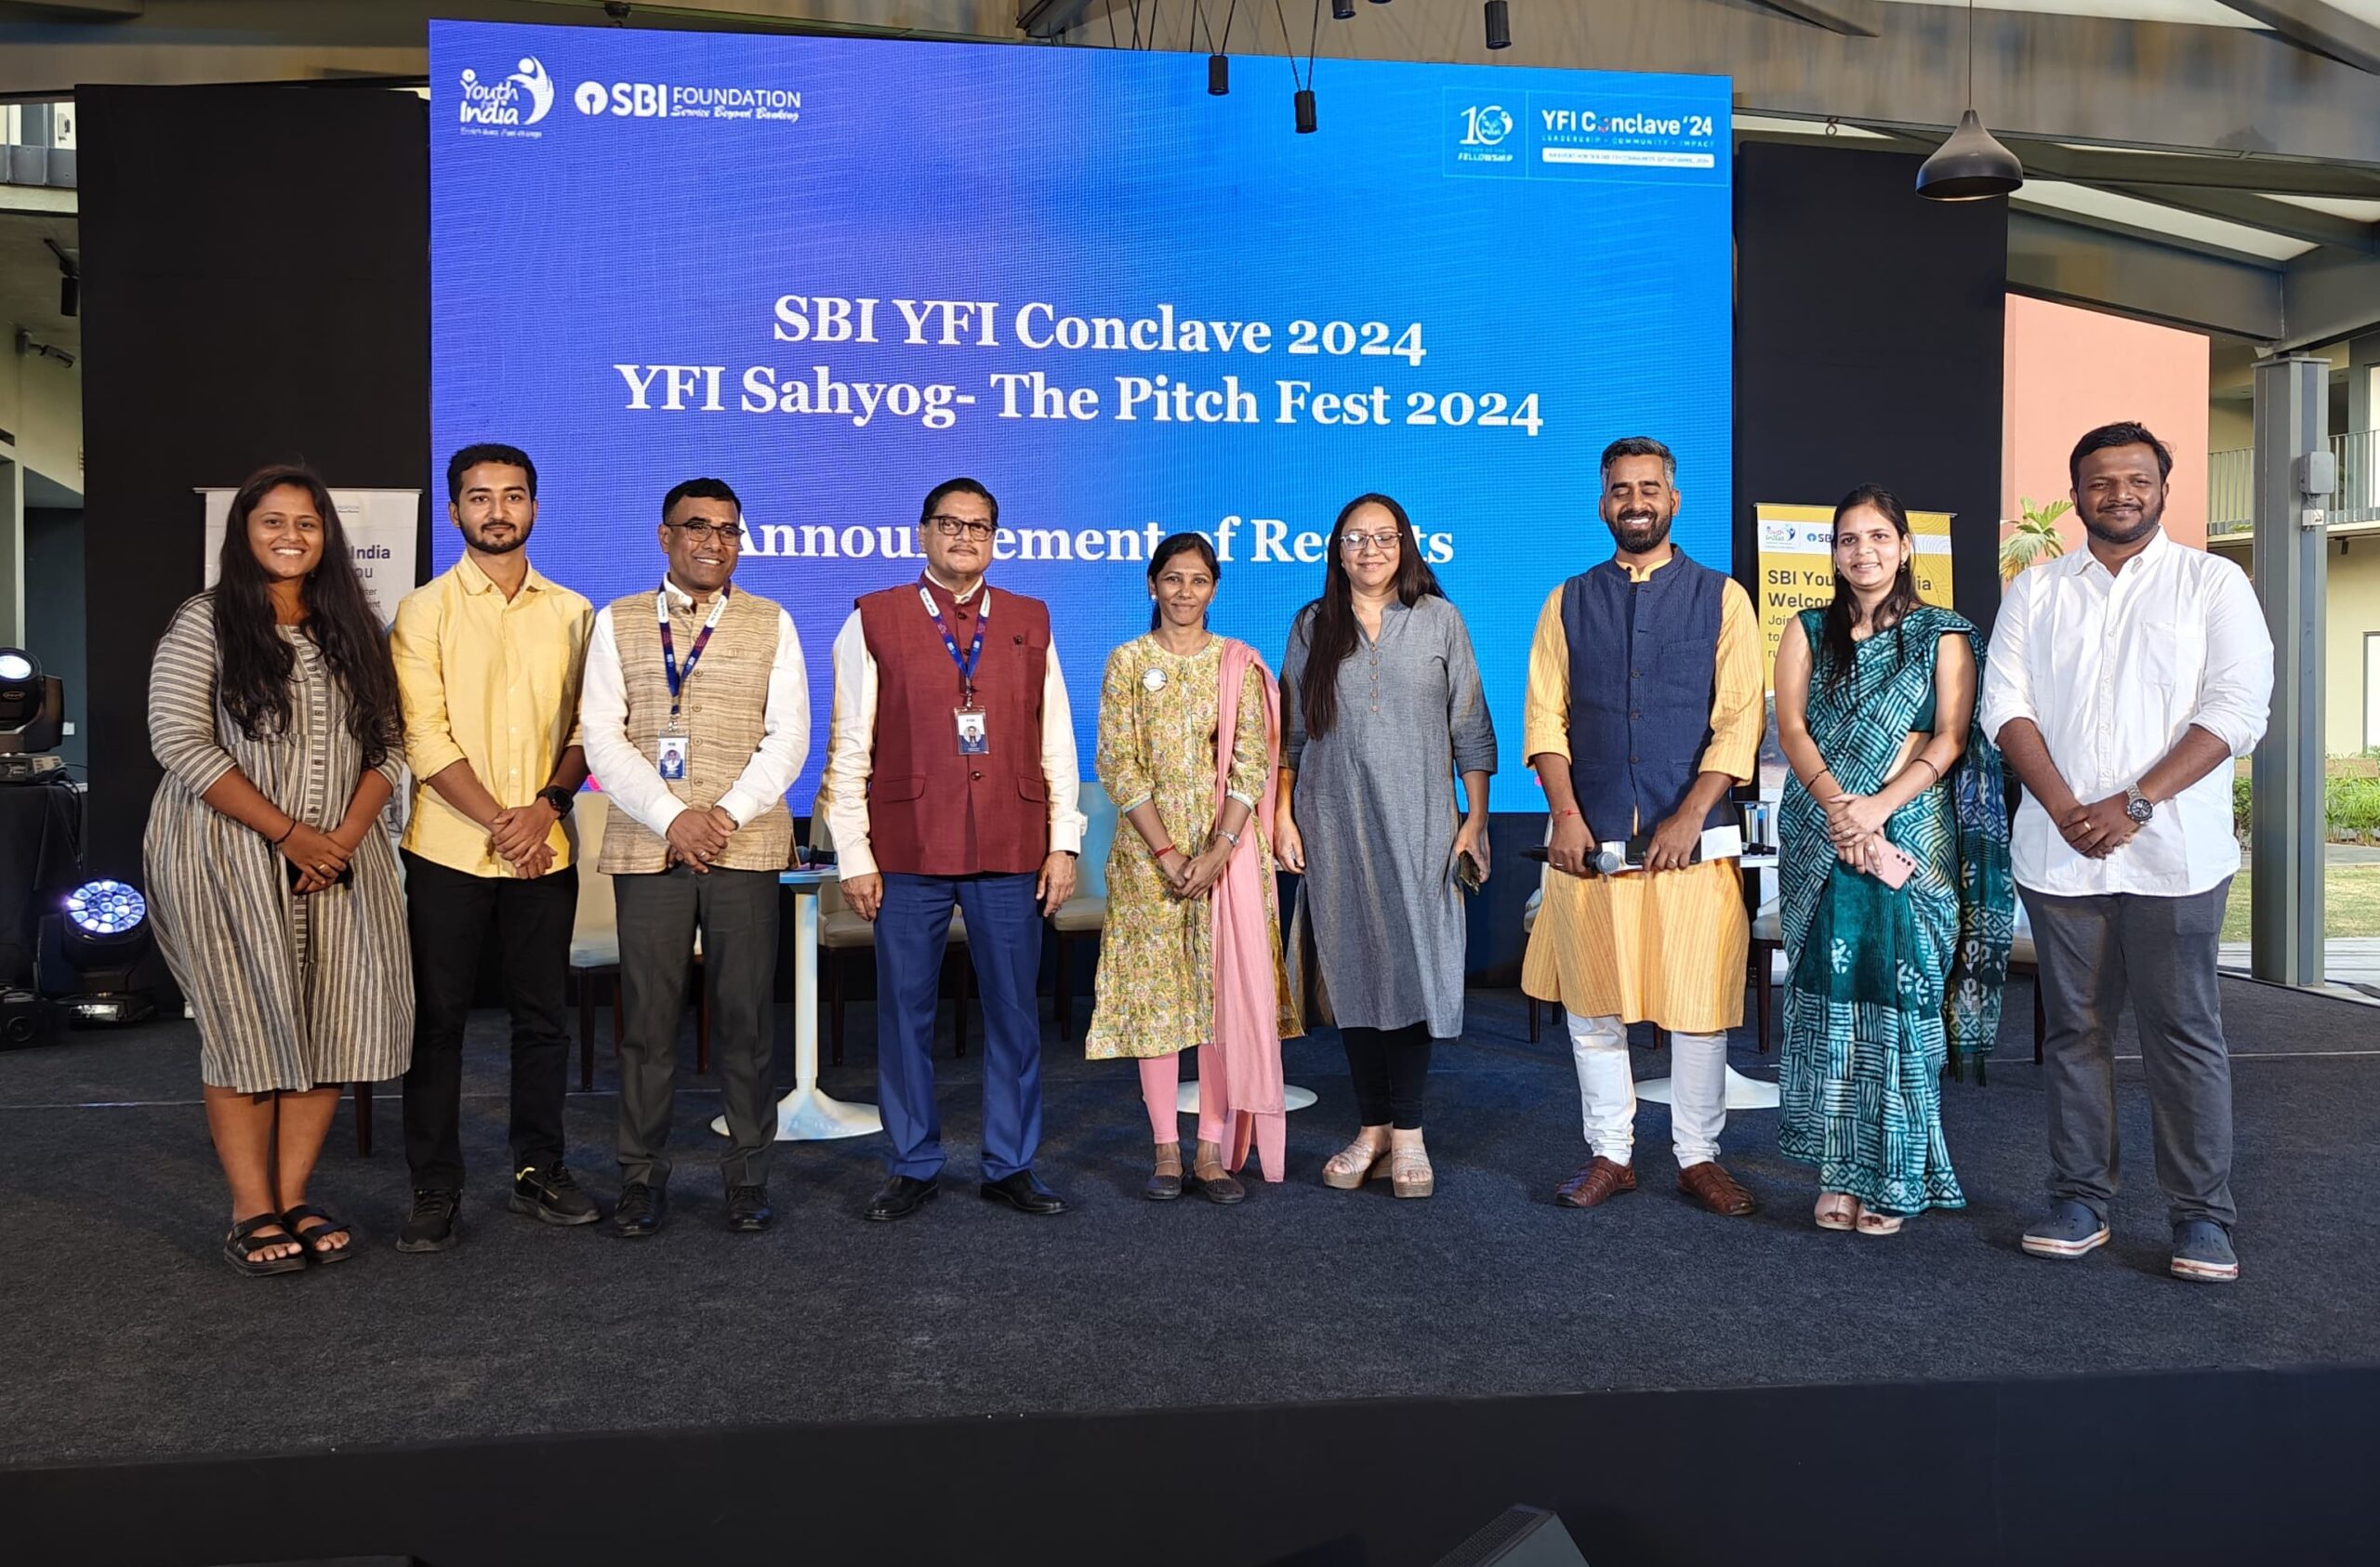 SBI Foundation, the CSR arm of the State Bank group recently hosted the two-day SBI Youth for India Conclave in Bangalore, offering a dynamic platform to social entrepreneurs and trailblazers from the social sector.